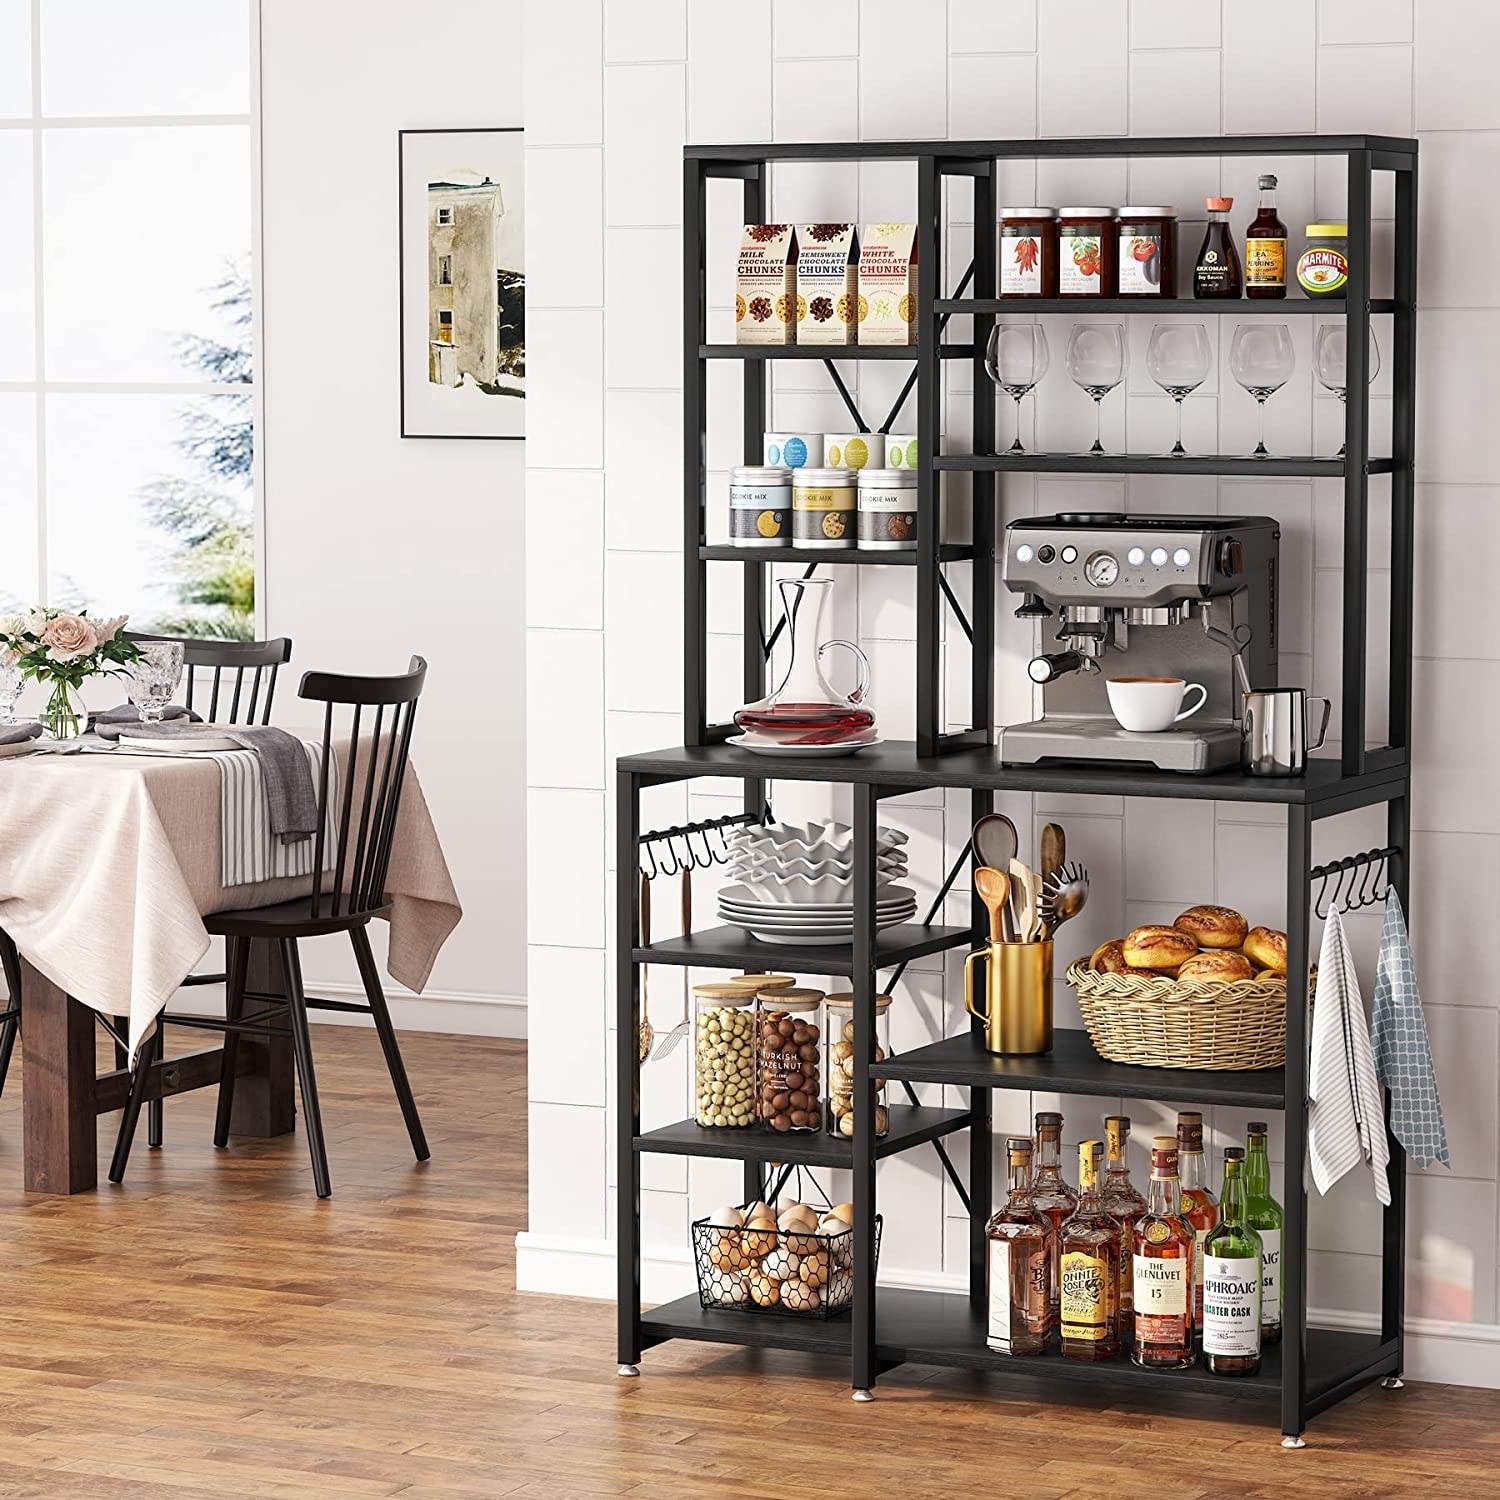 https://ak1.ostkcdn.com/images/products/is/images/direct/943bff4e7add10978c07096f93b746f200c7a380/10-Tiers-Kitchen-Bakers-Rack%2C-Floor-Standing-Kitchen-Utility-Storage-Shelf%2C-Microwave-Oven-Stand-with-10-S-Shaped-Hooks.jpg